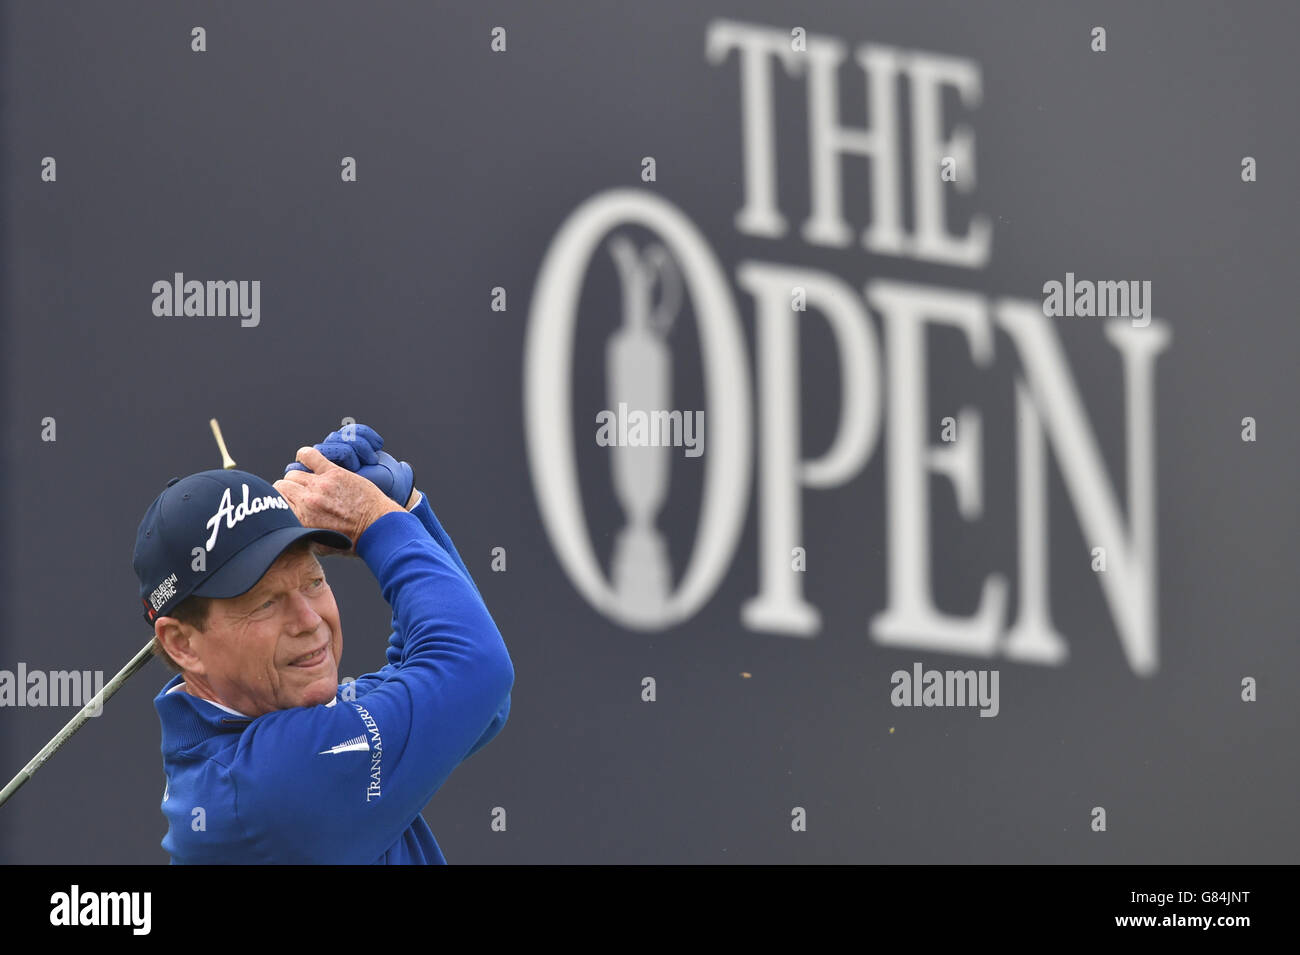 USA's Tom Watson tees off on the 1st during day one of The Open Championship 2015 at St Andrews, Fife. PRESS ASSOCIATION Photo. Picture date: Thursday July 16, 2015. See PA story GOLF Open. Photo credit should read: Owen Humphreys/PA Wire. RESTRICTIONS: . Call +44 (0)1158 447447 for further info. Stock Photo